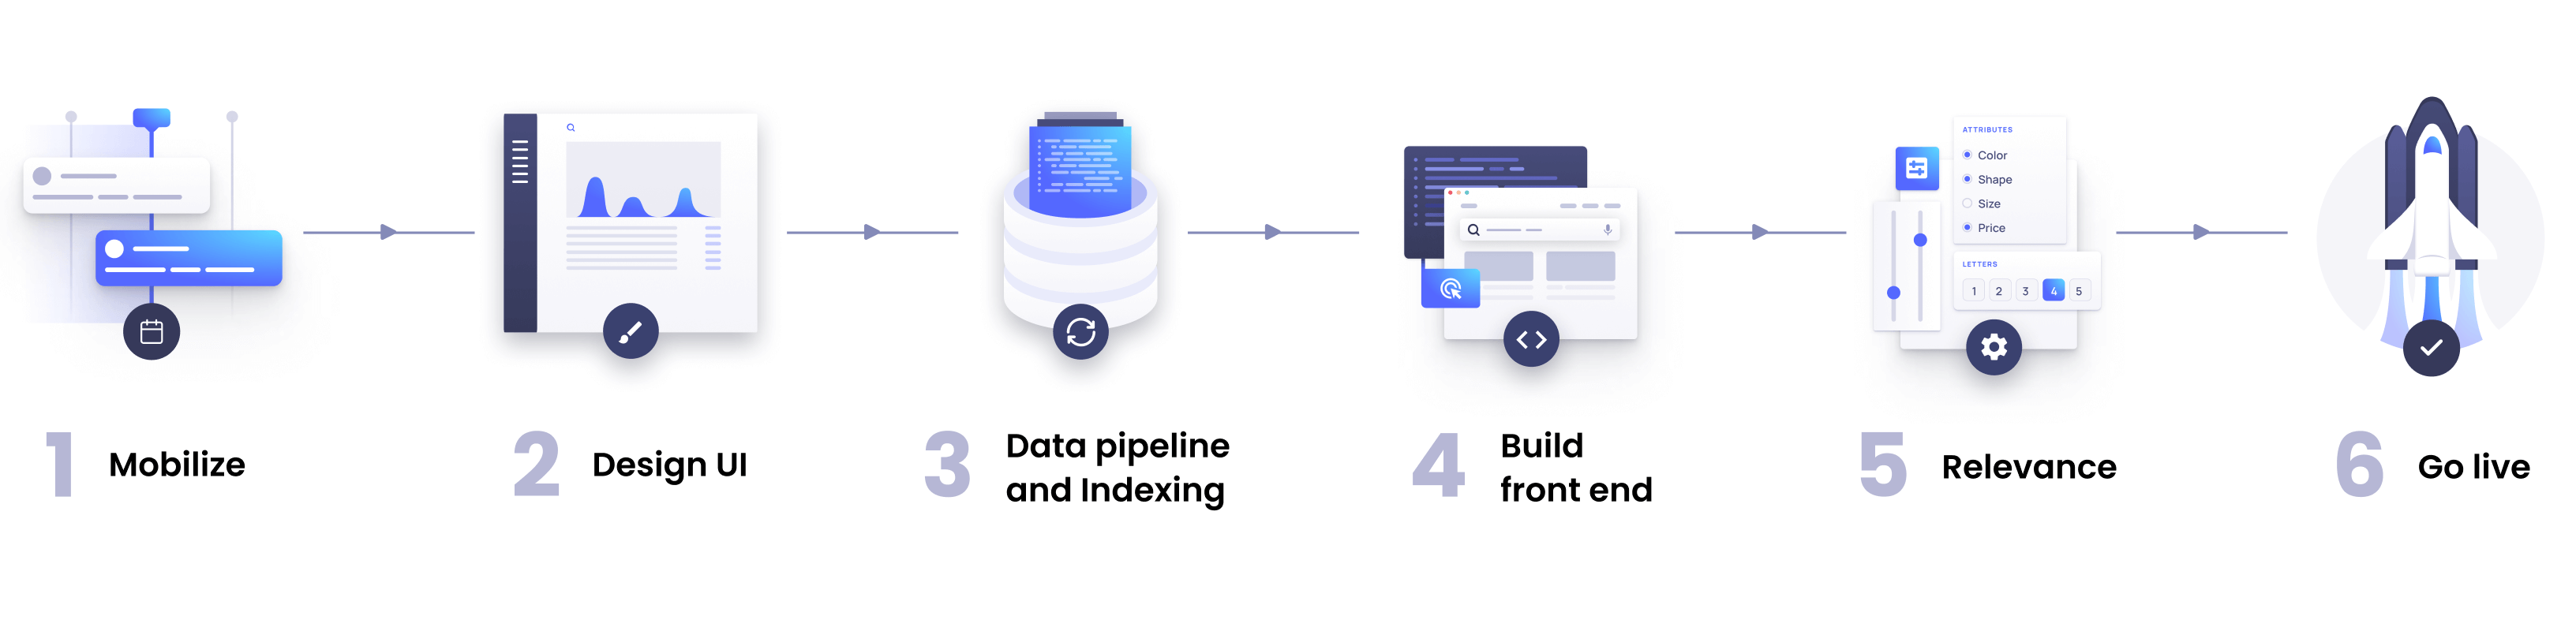 Onboarding visually explained